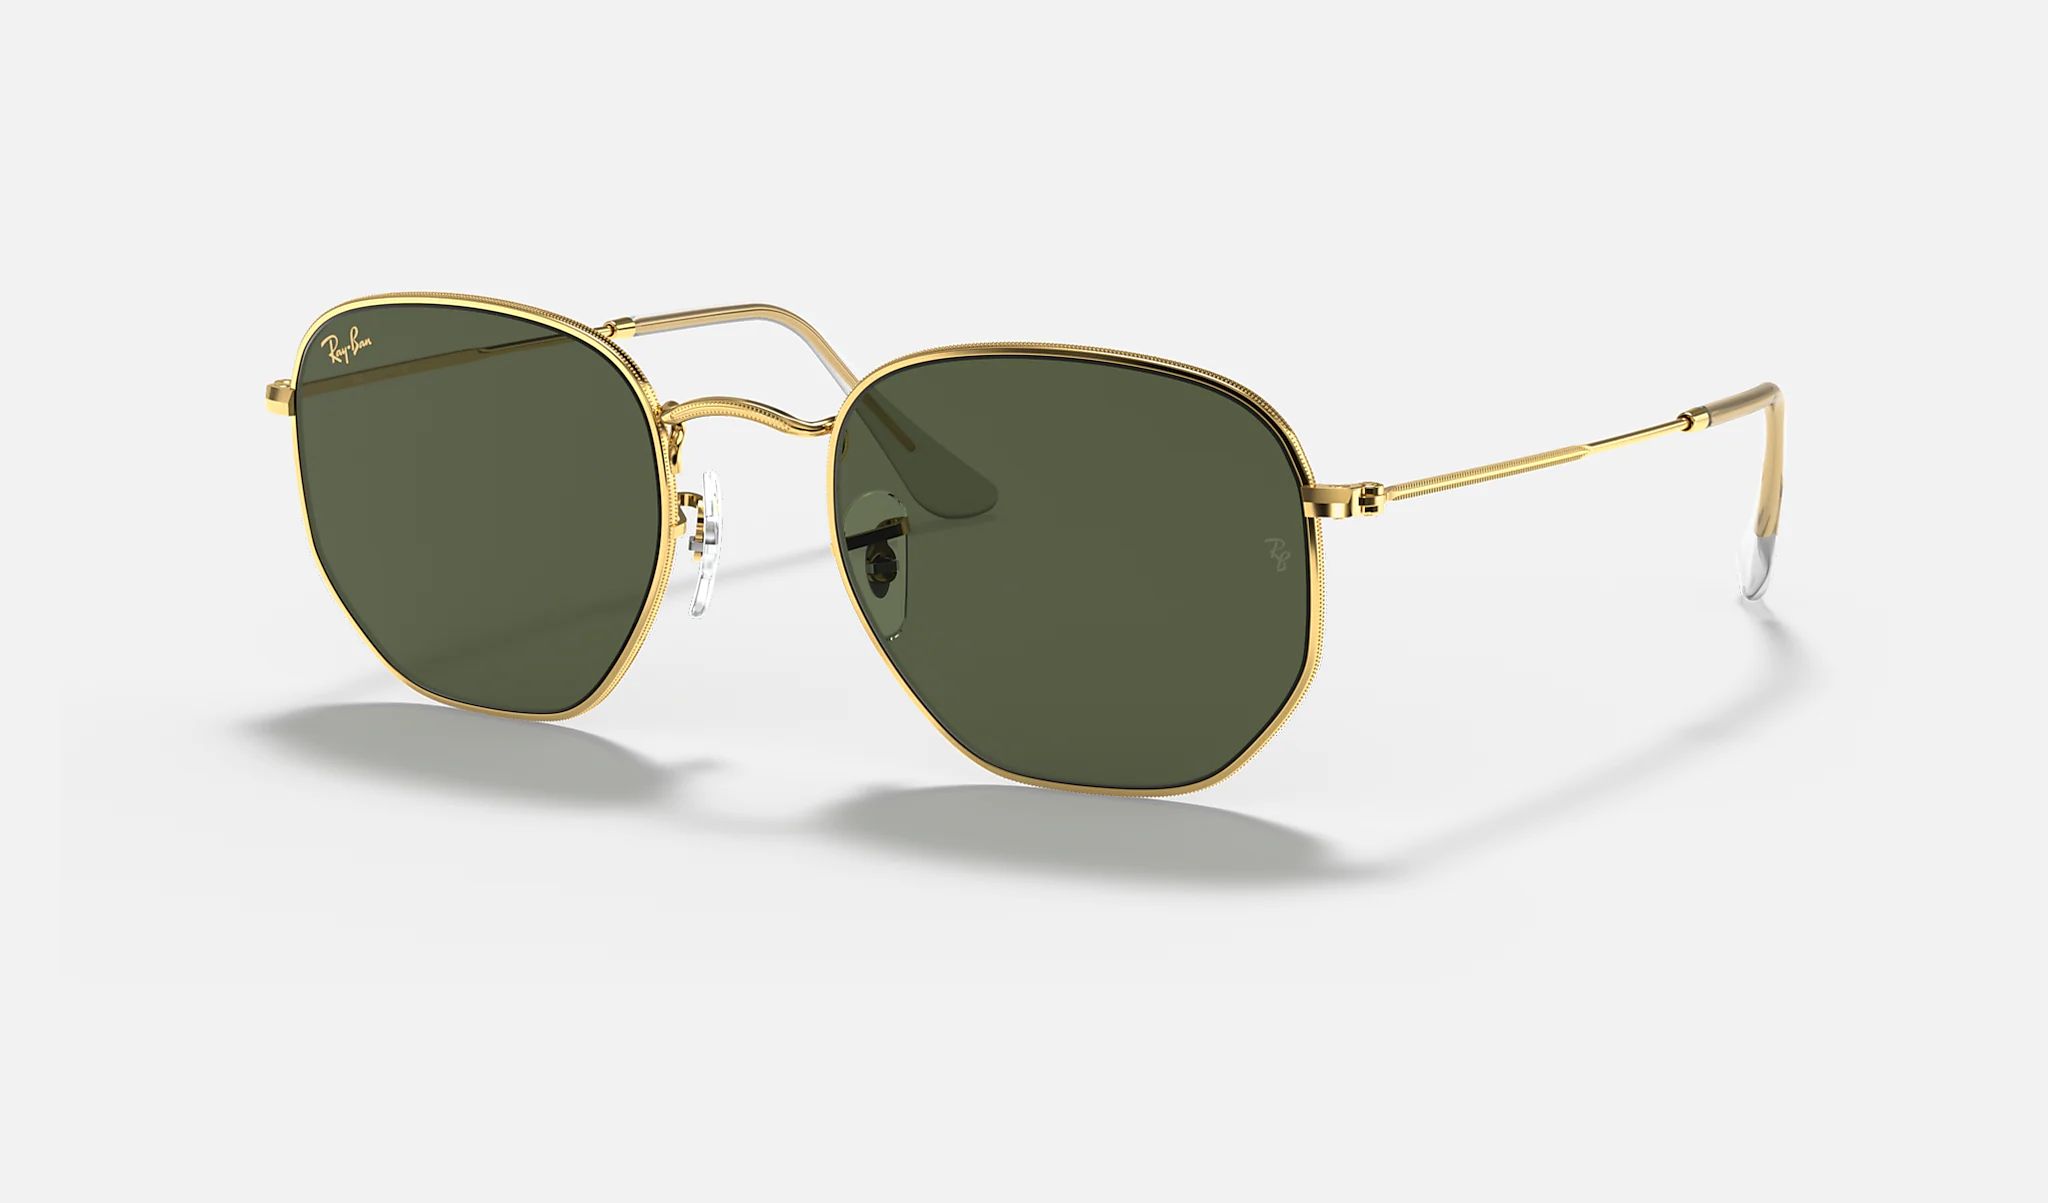 Check out the Hexagonal Legend Gold at ray-ban.com | Ray-Ban (US)